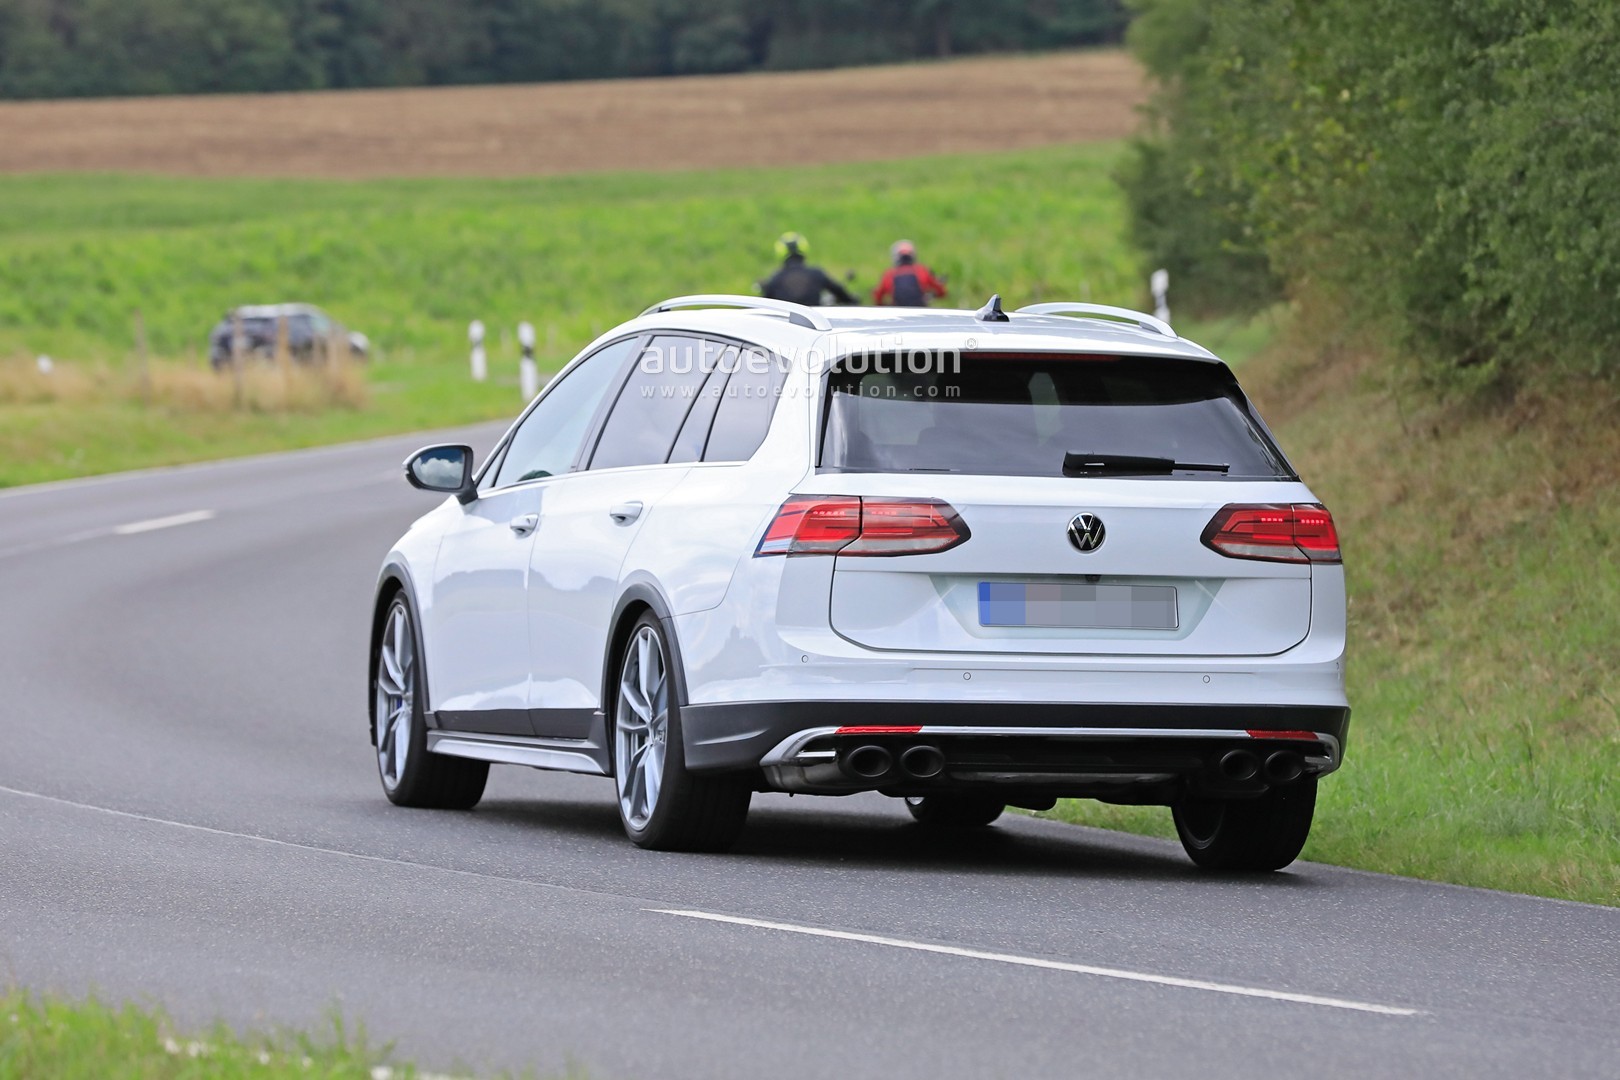 2020 - [Volkswagen] Golf VIII - Page 19 Volkswagen-making-a-golf-r-wagon-with-audi-s4-power-that-looks-line-an-alltrack_25